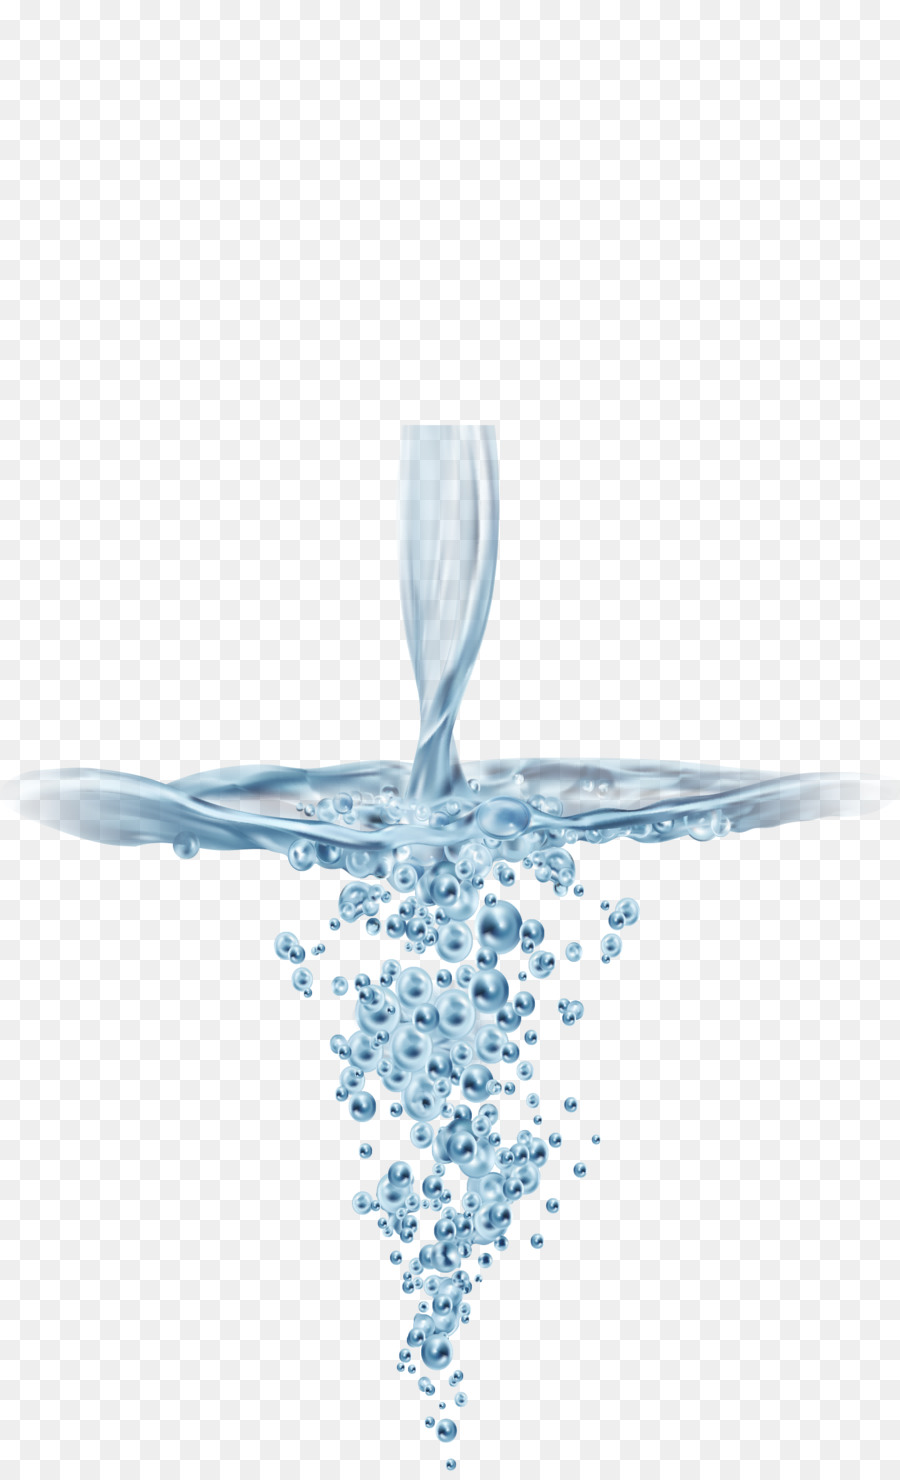 Mineral water Drop - Clear water droplets png download - 1442*2357 - Free Transparent Water png Download.